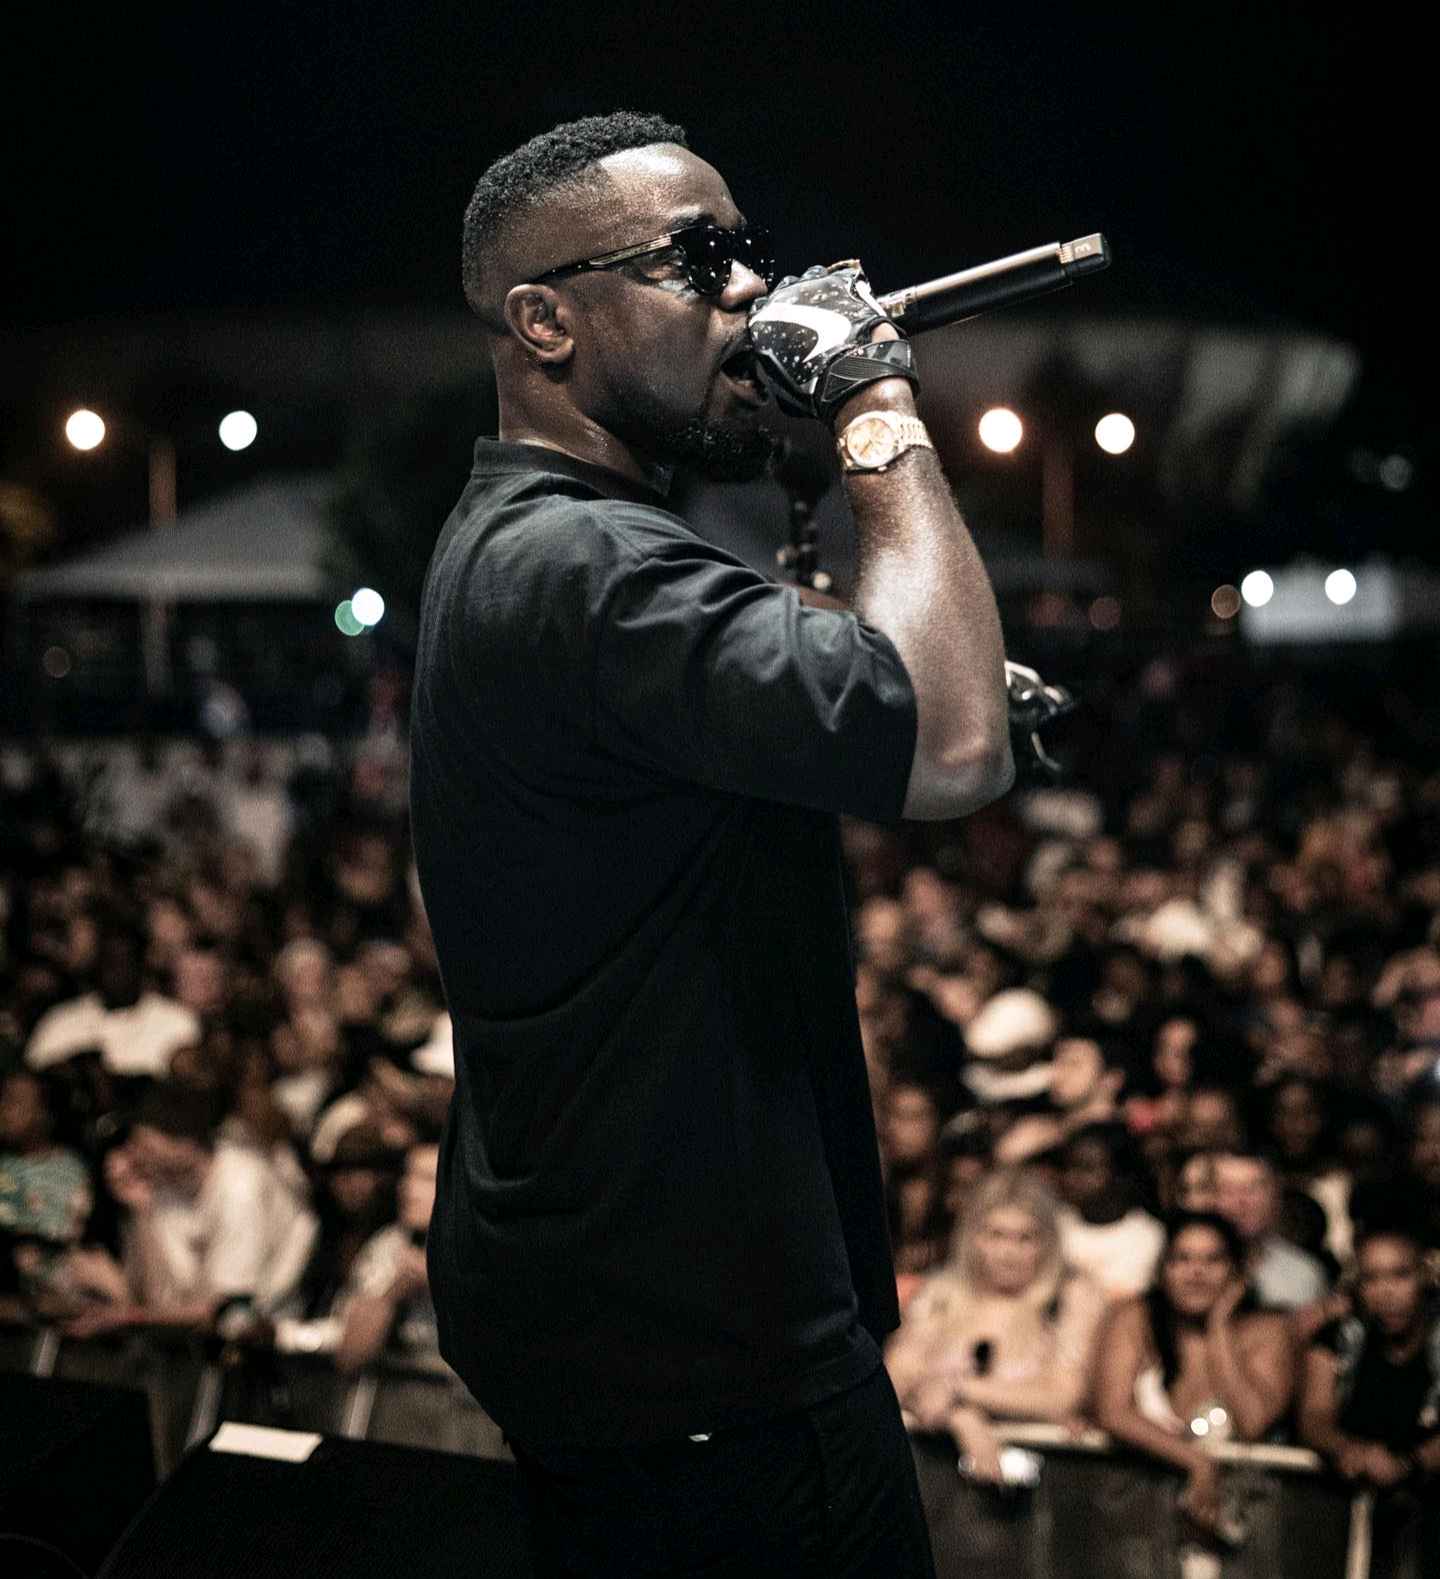 Check out below how Ghanaian musician "Sarkodie" has decided to welcome critics